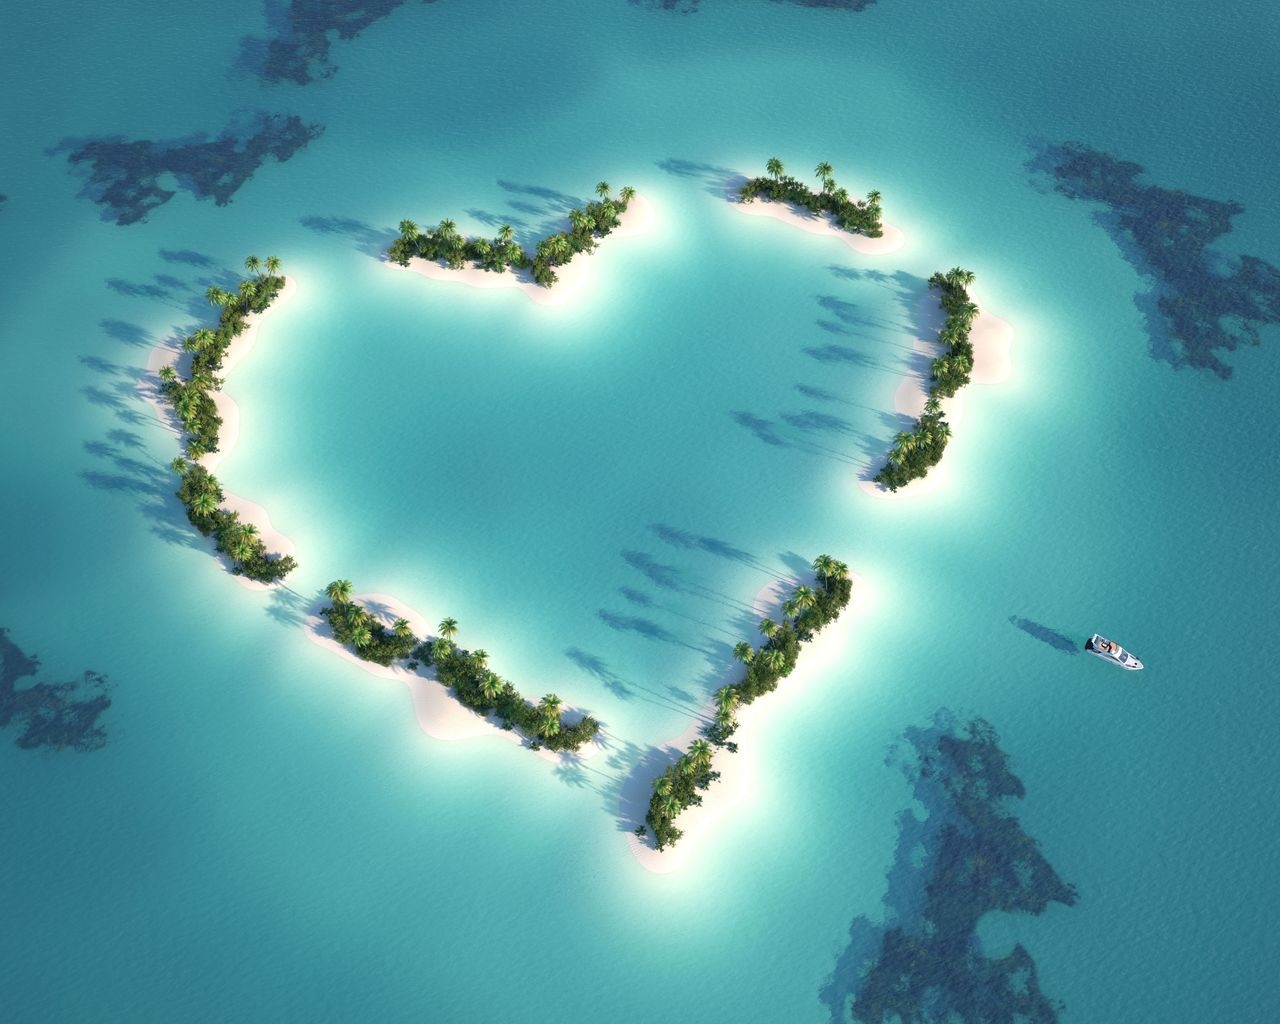 The Love Island for 1280 x 1024 resolution